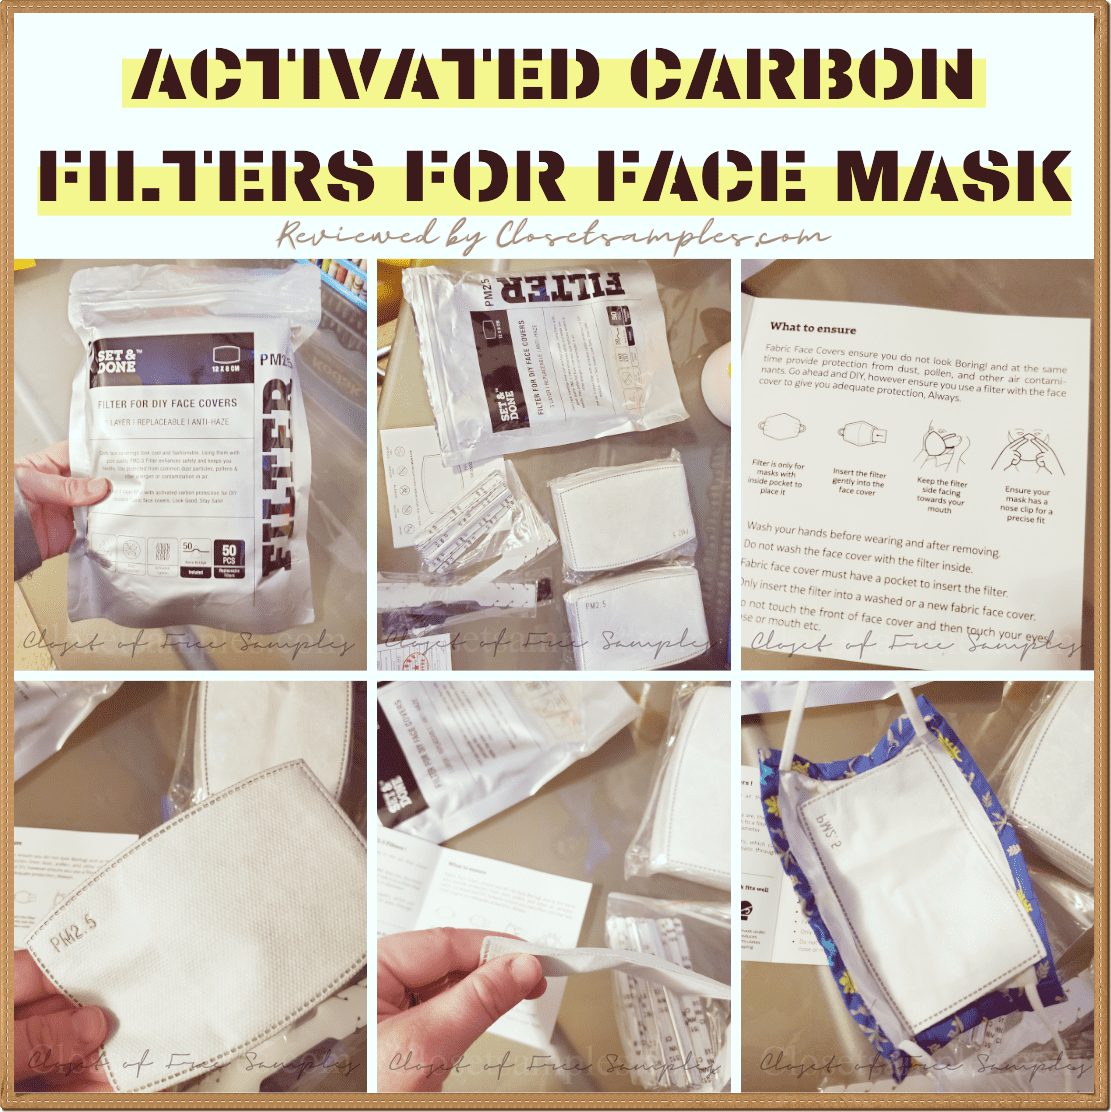 PM2.5 Activated Carbon Filters...